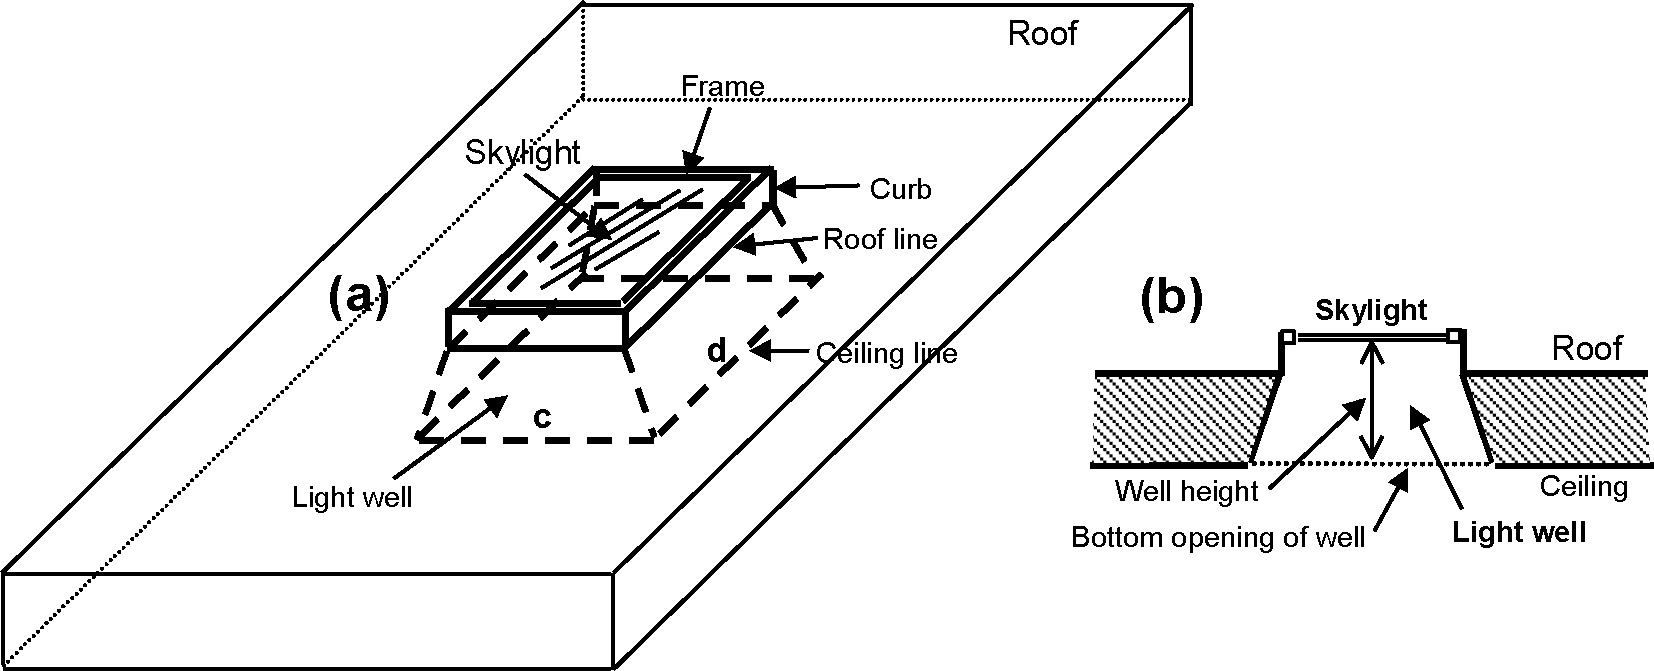 Skylight with light well: (a) perspective view, (b) vertical section. If the bottom of the light well is a rectangle of side lengths c and d, as shown in (a), then the perimeter of the bottom of the well = 2(c+d) and the area = cd (see description of field names for the Light Well object). [fig:skylight-with-light-well-a-perspective-view-b]